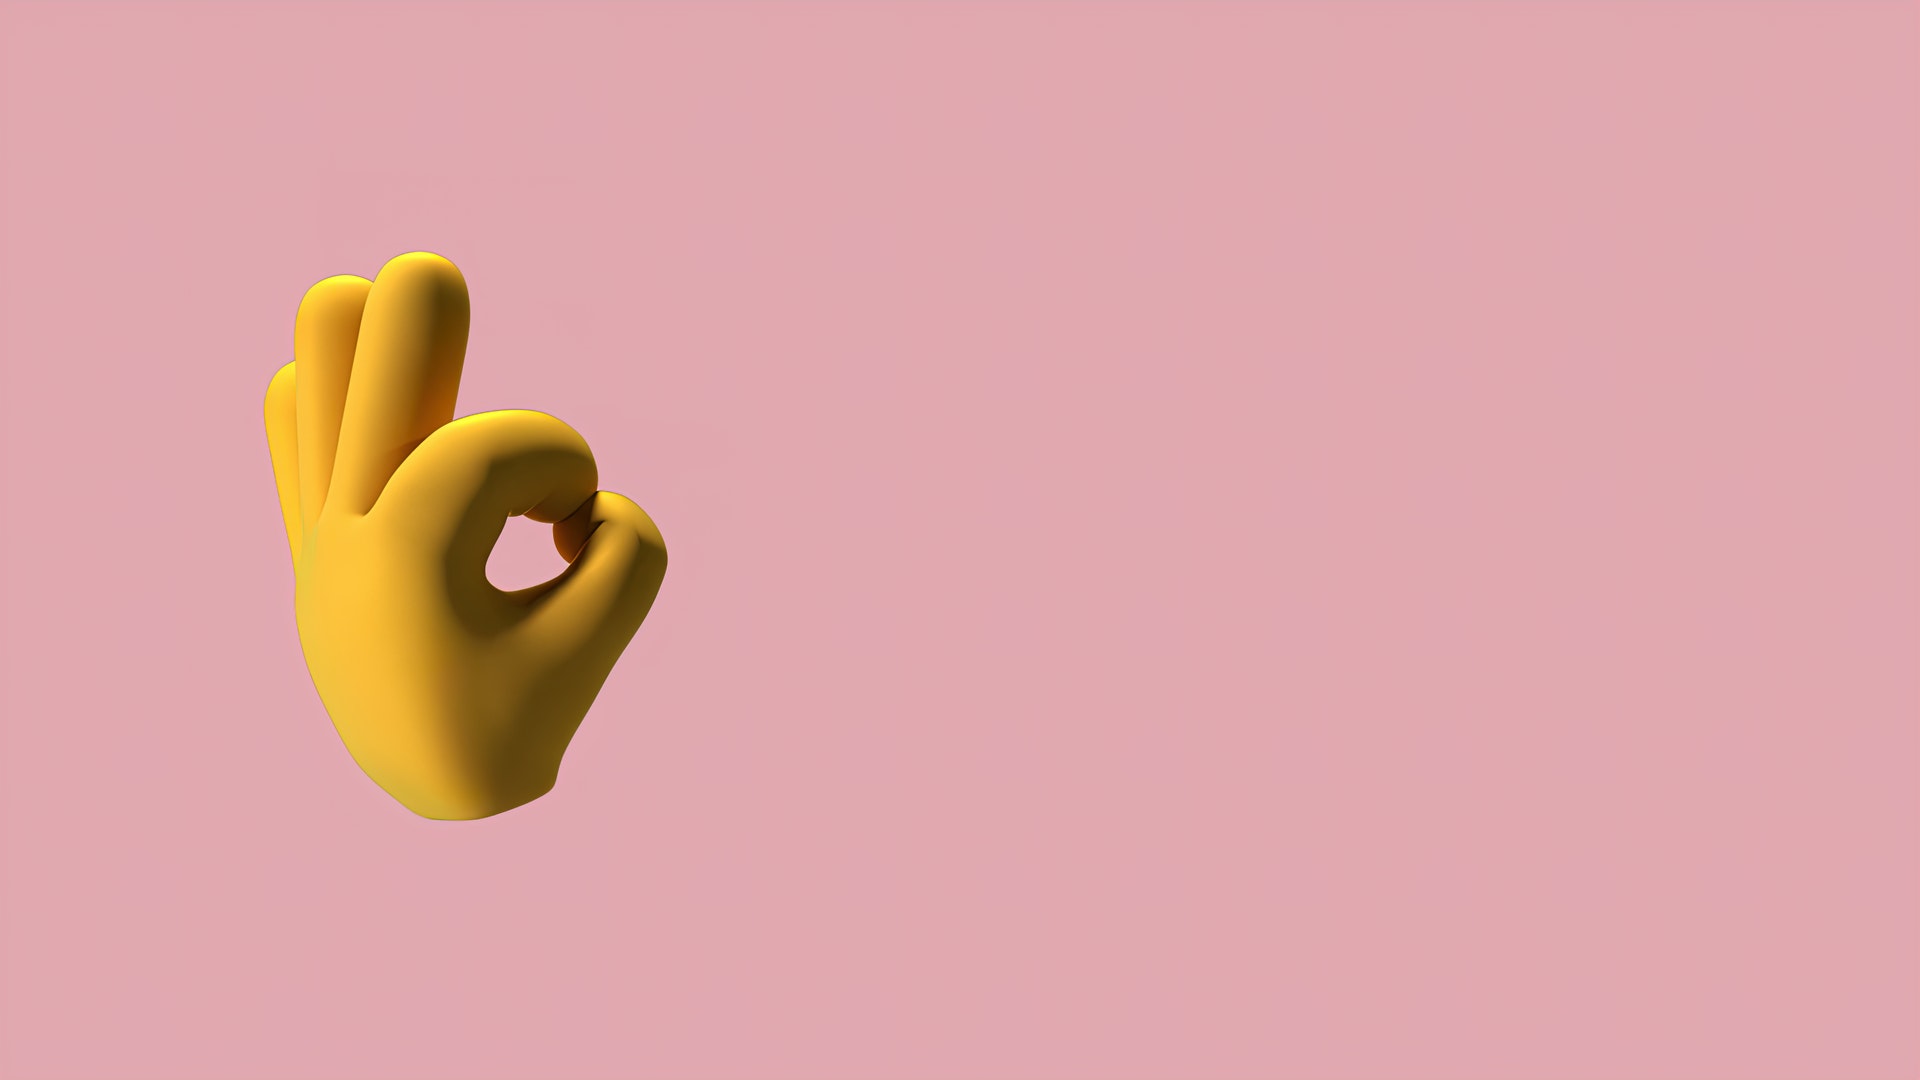 Emoji of hand showing perfect